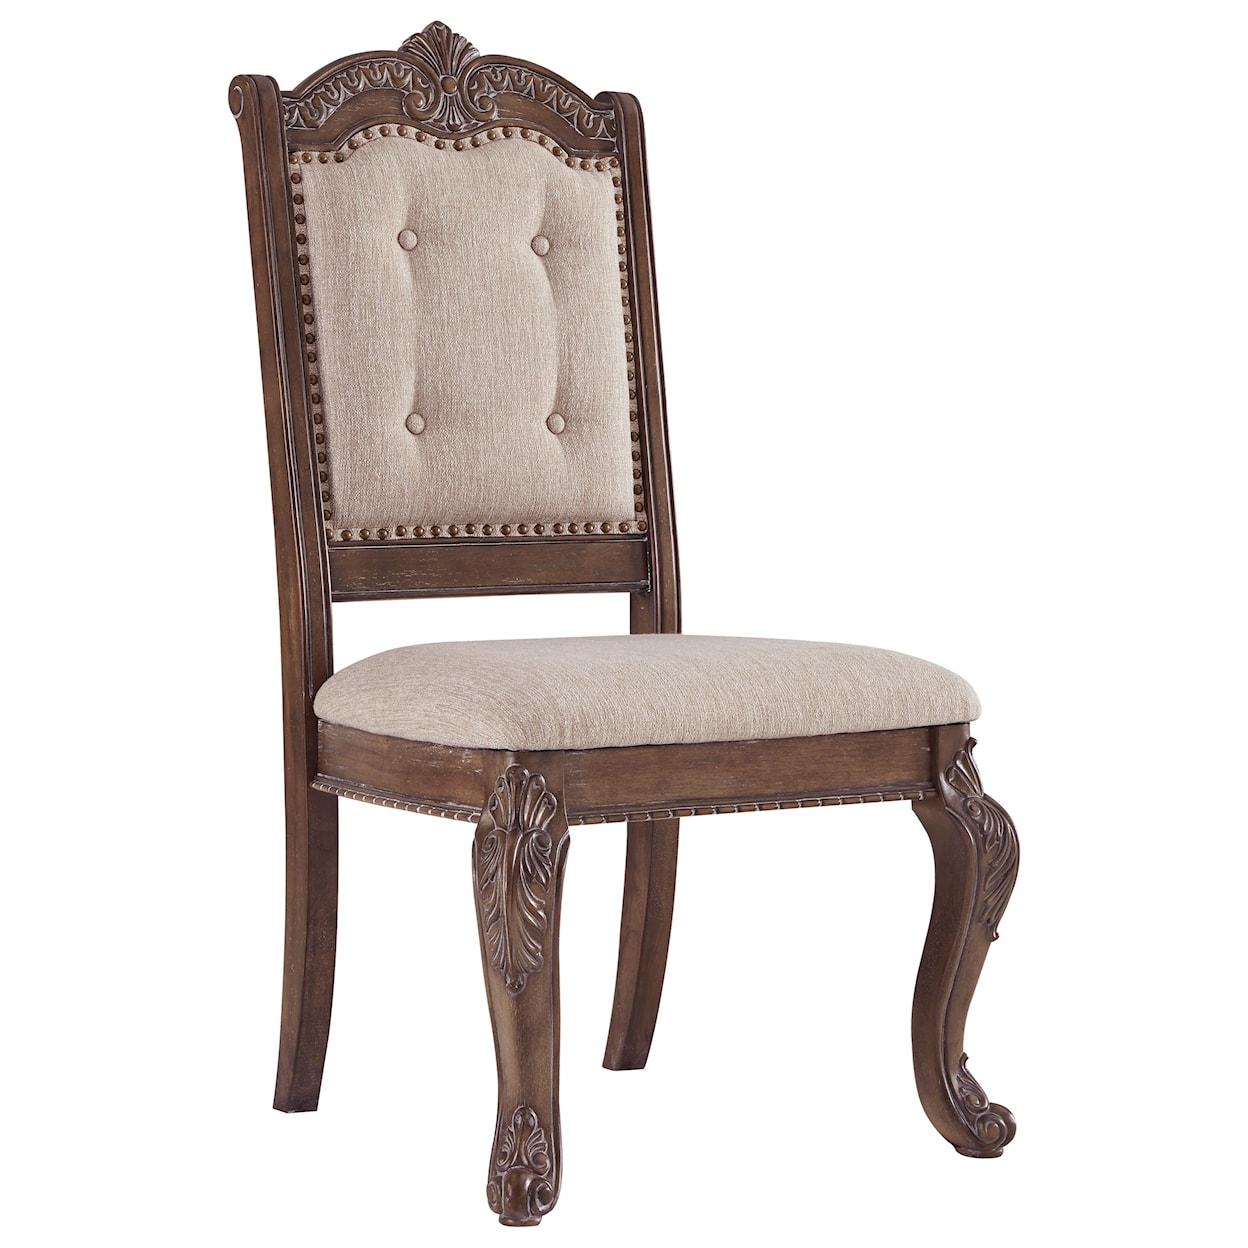 Signature Design by Ashley Charmond Dining Upholstered Side Chair